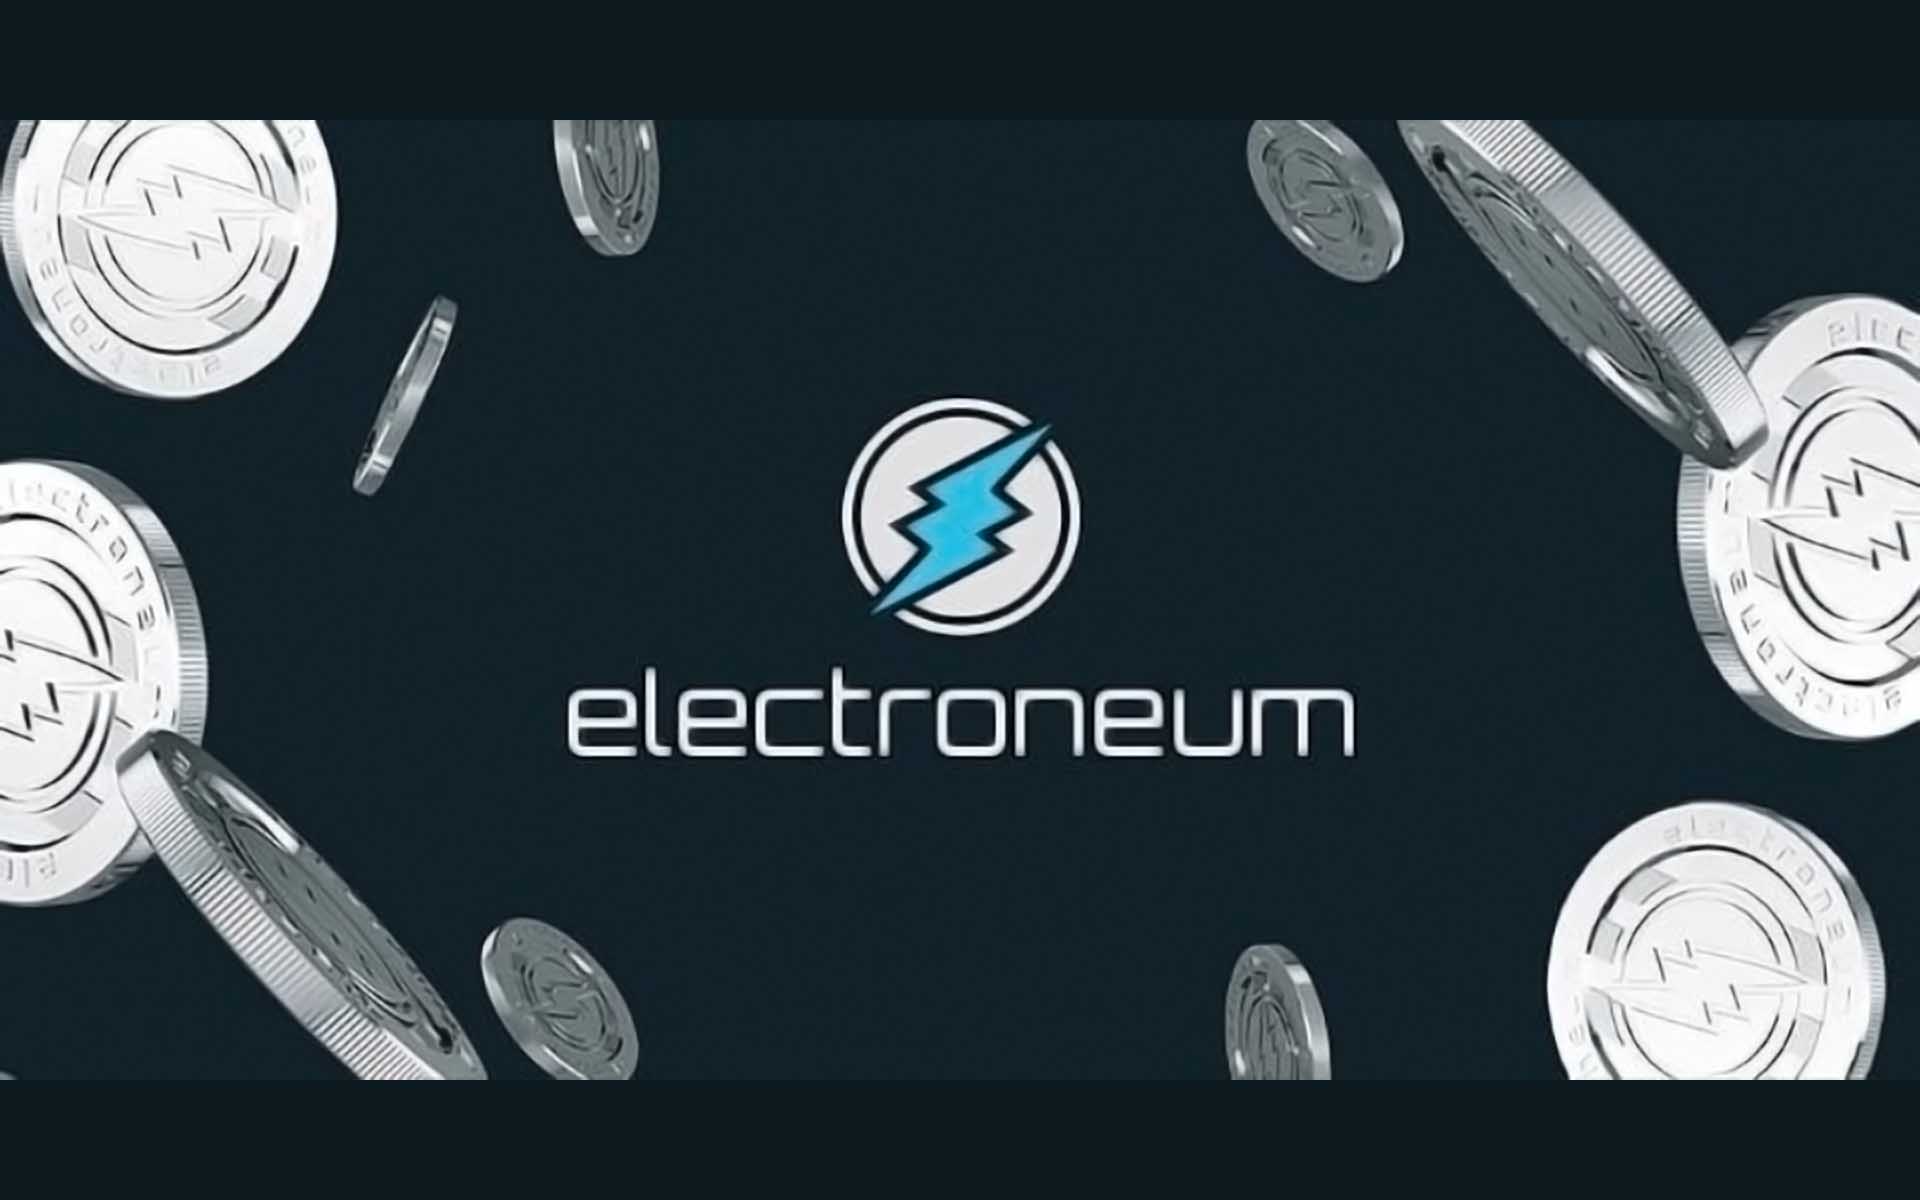 Electroneum: An Overview of the Cryptocurrency Developed for Mobile - Coin Bureau